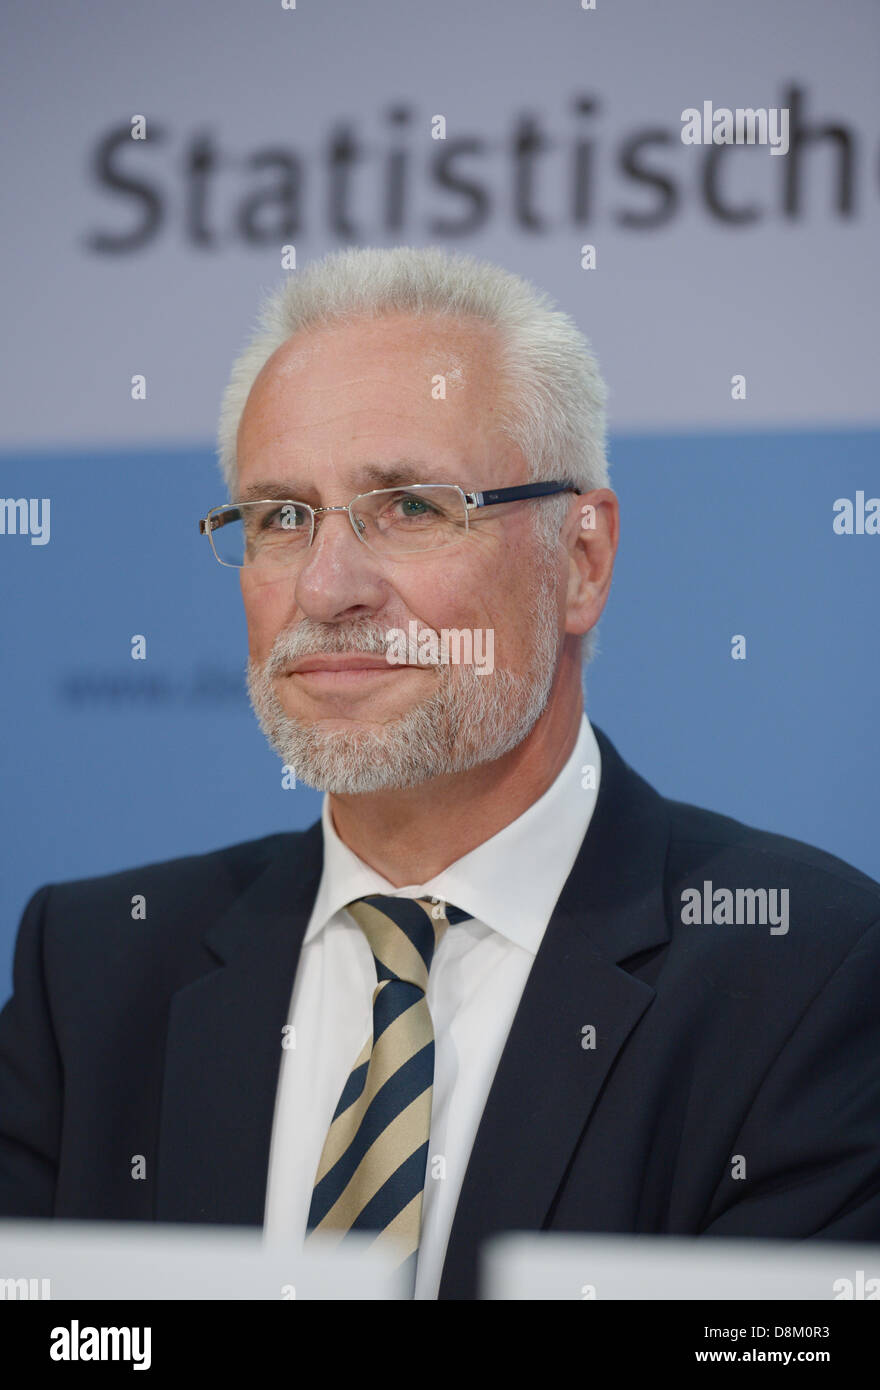 President of the German Federal Statistical Office, Roderich Egeler, talks during a press conference 'Zensus 2011 - Fakten zur Bevoelkerung in Deutschland' in Berlin, Germany, 31 May 2013. Germany has less inhabitants than had been assumed up to now, around 80,2 millions. PHOTO: RAINER JENSEN Stock Photo